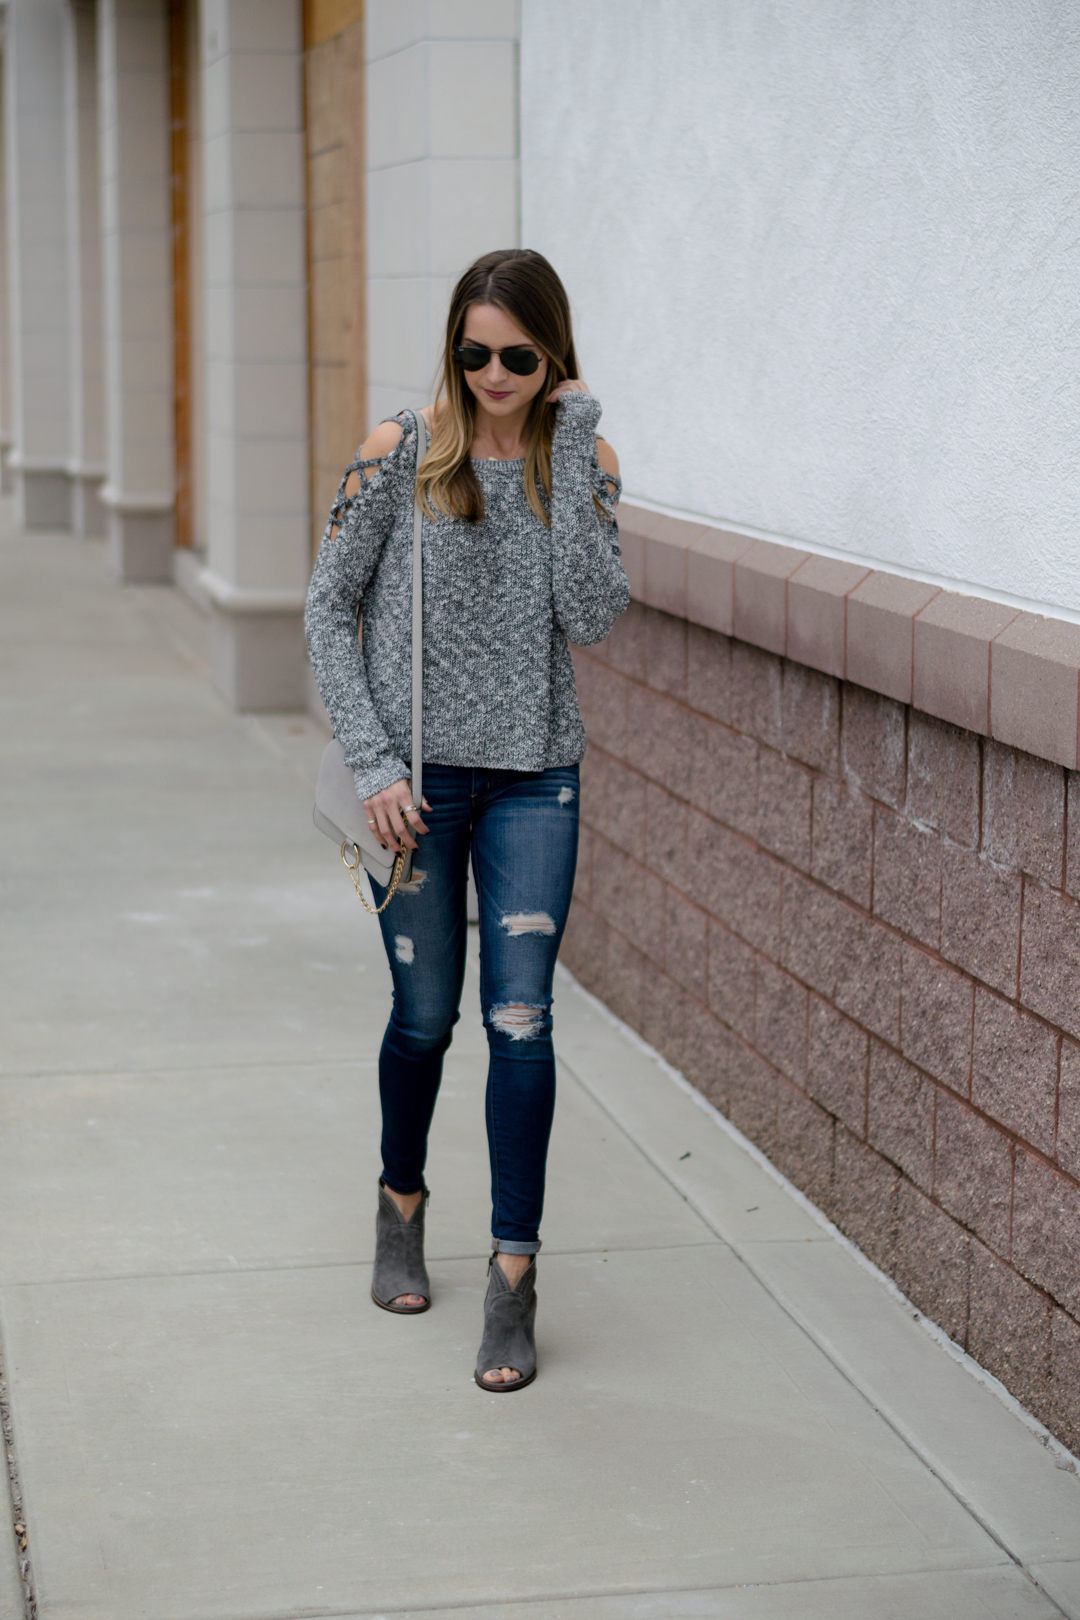 express lace up cold shoulder sweater, gray sweater outfit, peep toe booties, open toe booties, casual fall weekend outfit